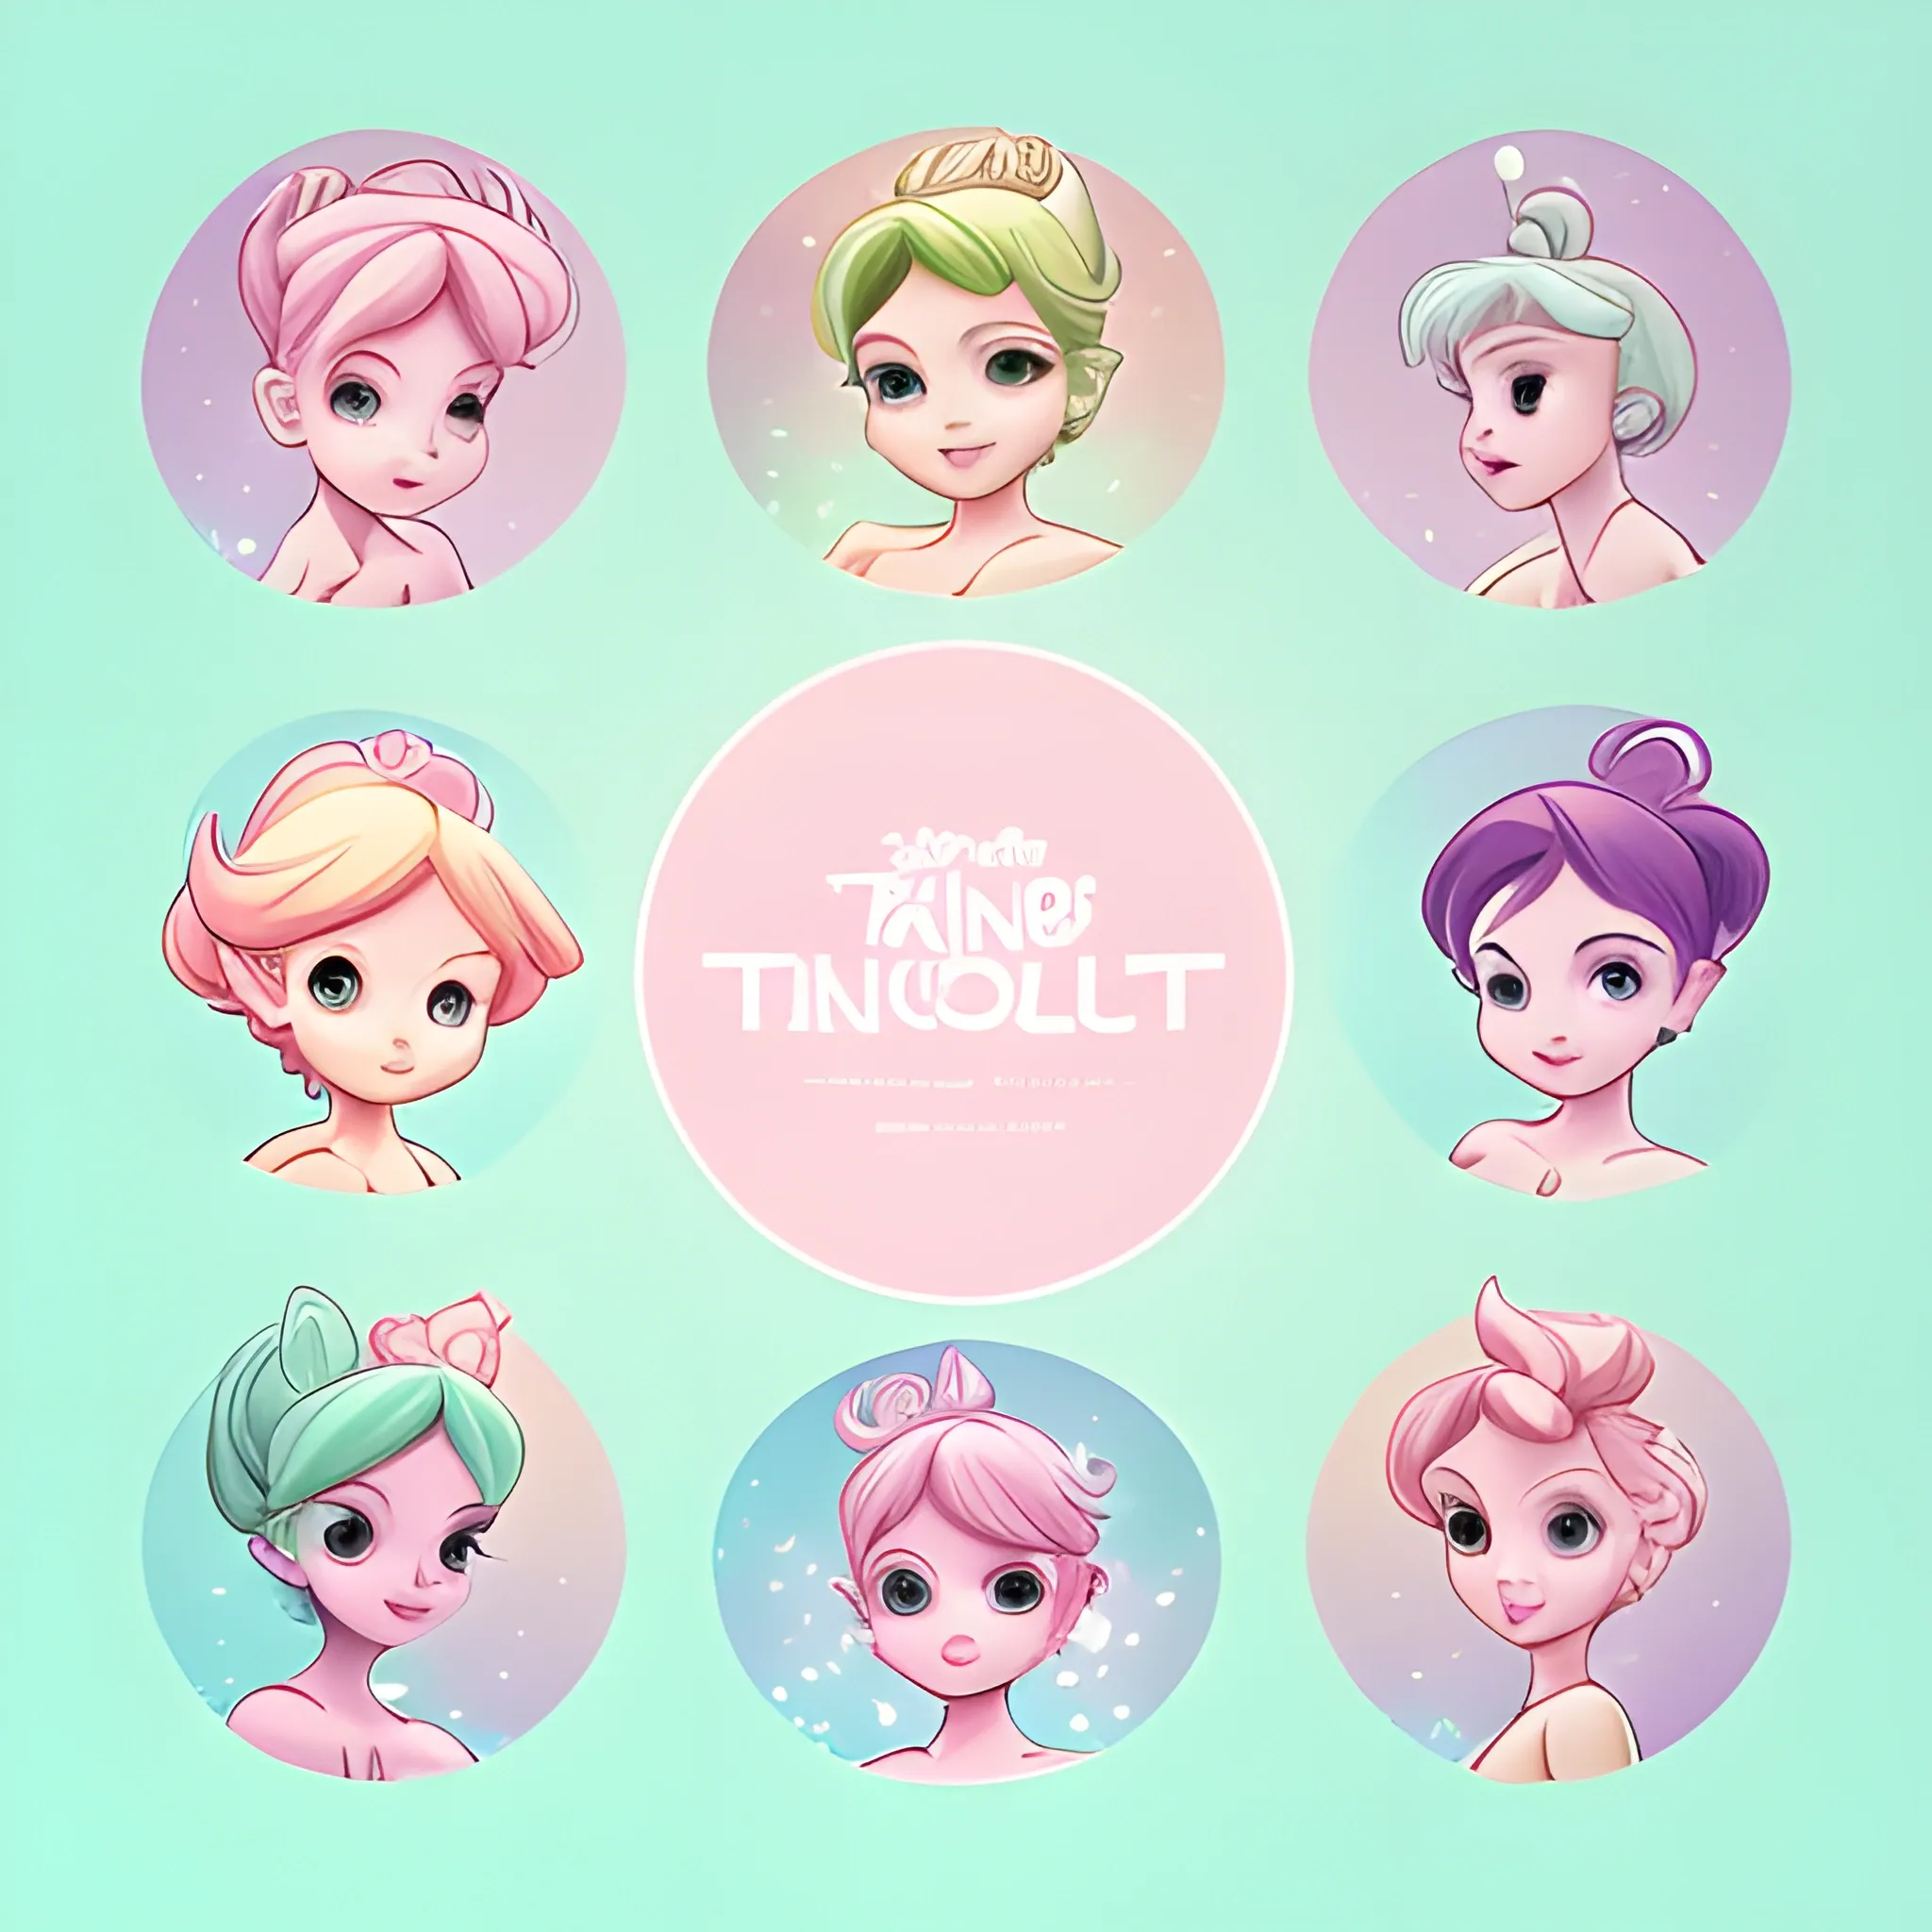 chaotic artwork using tinker bell animation movie element in pastel colour scheme. soft focus print designs. 
graphic, animated, characters, 